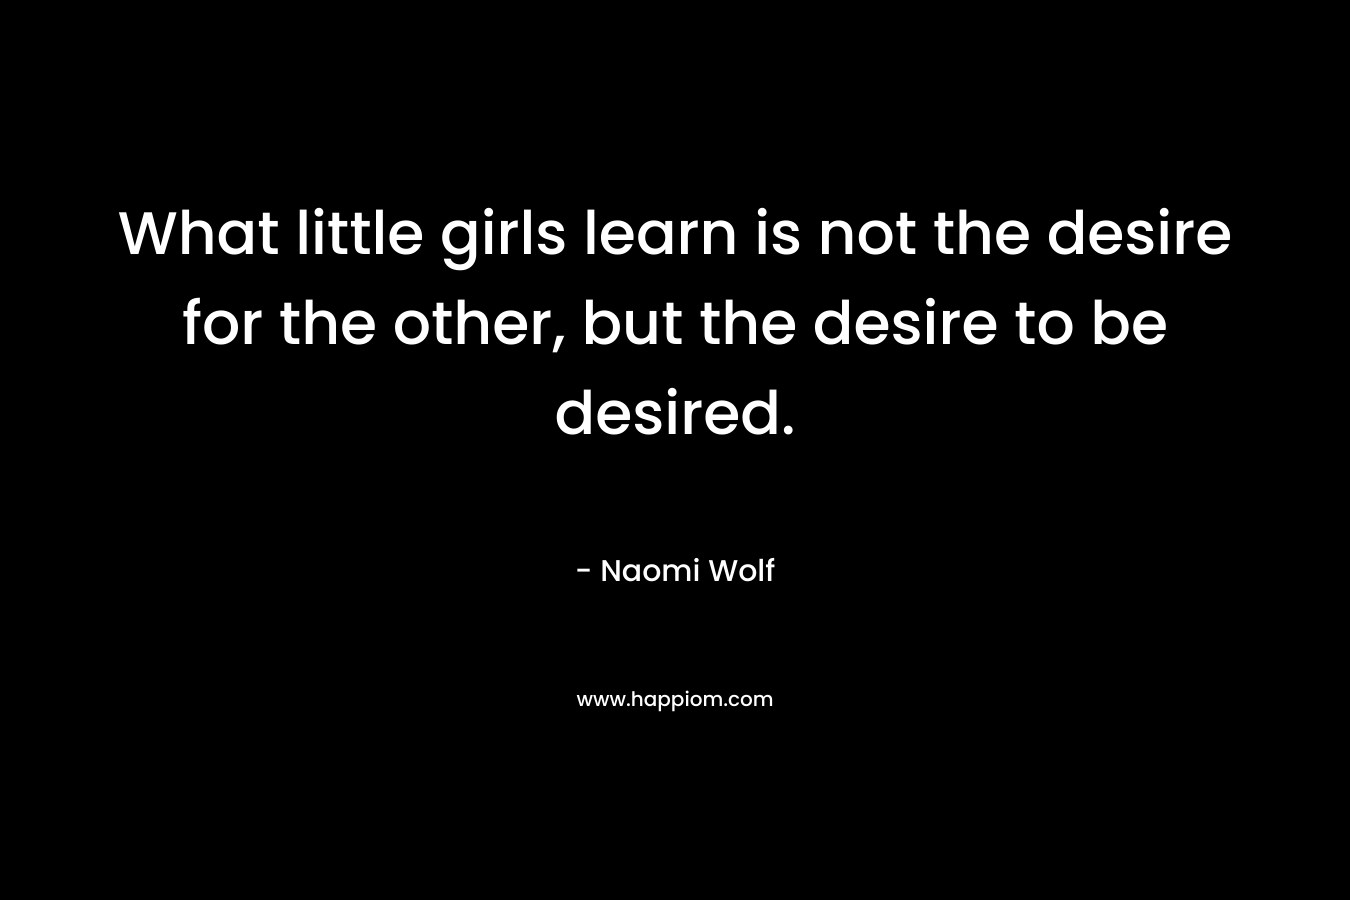 What little girls learn is not the desire for the other, but the desire to be desired.